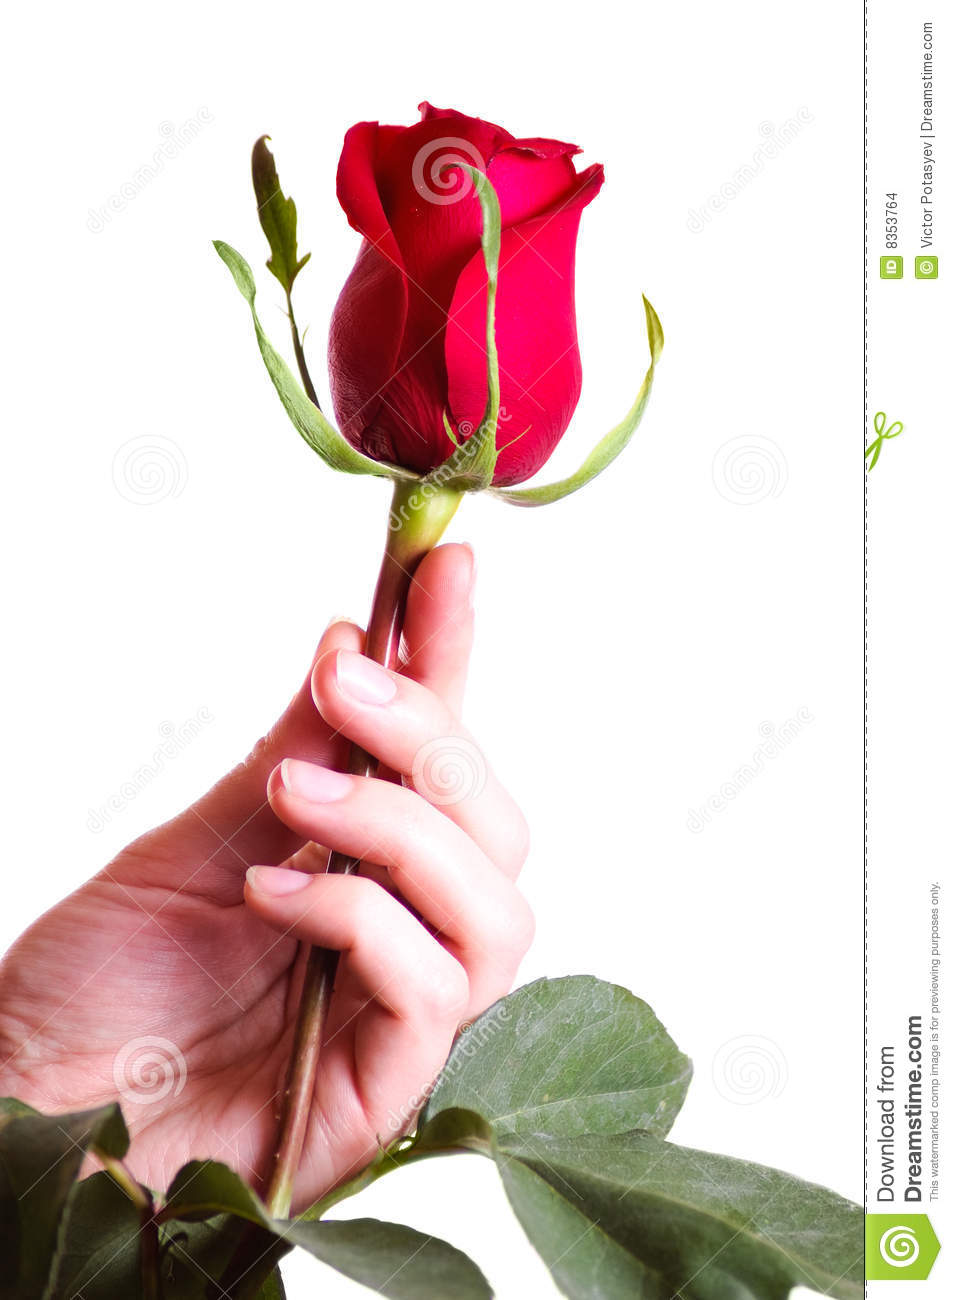 Hand Holding Beautiful Red Rose Stock Images   Image  8353764